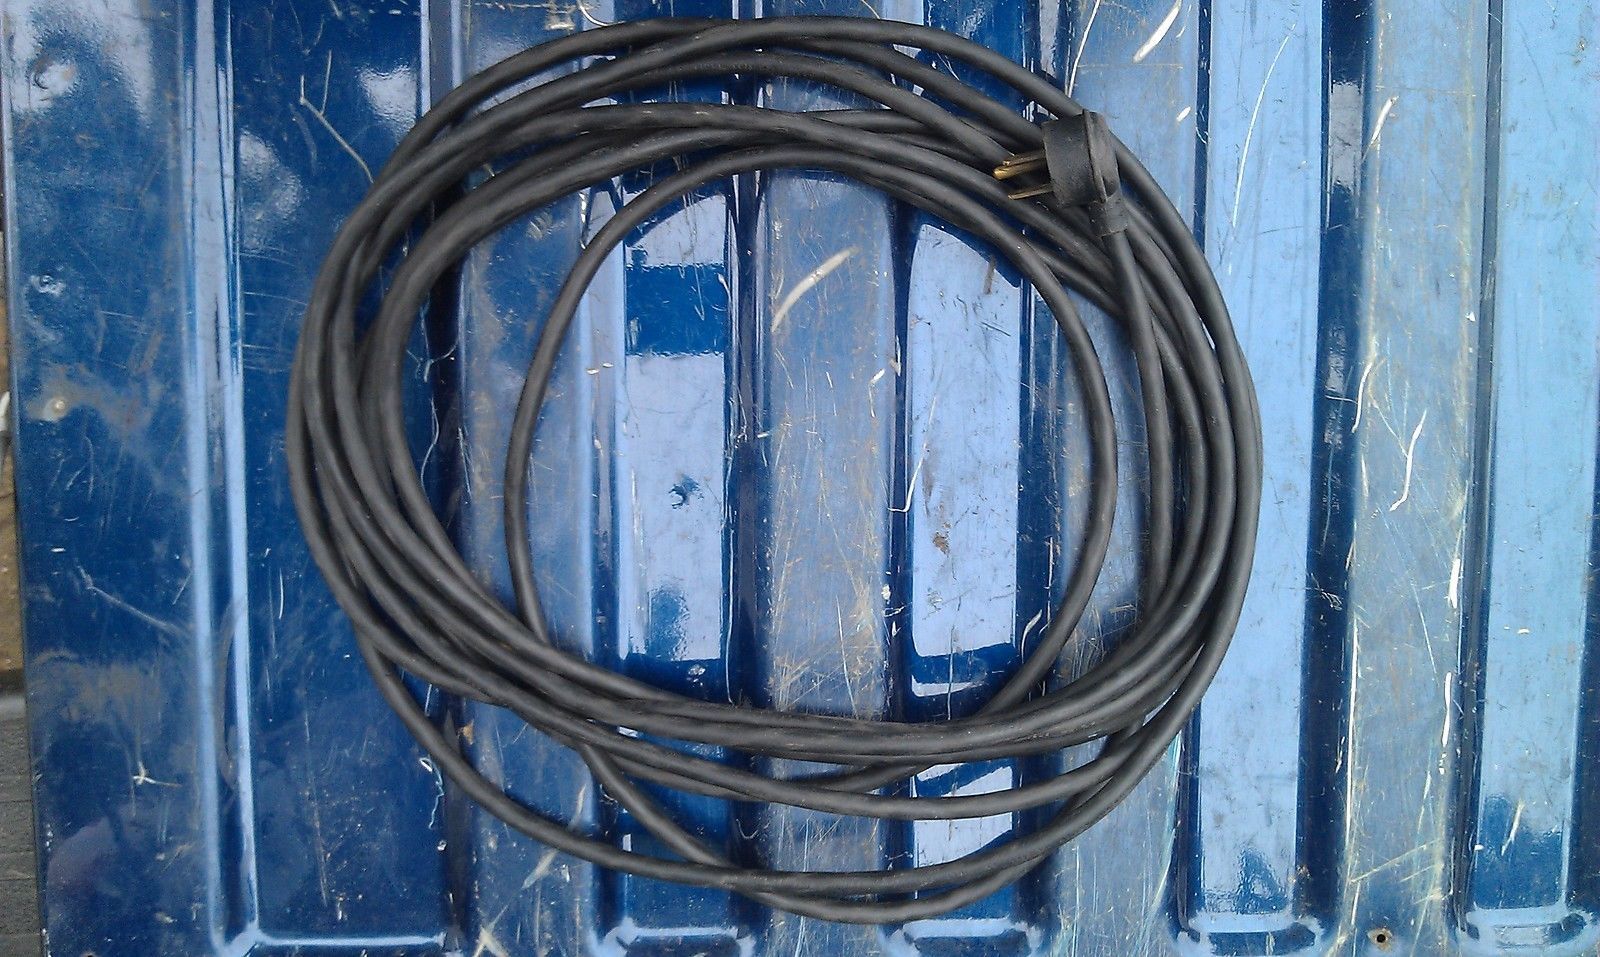 8JJ48        24' LEAD CORD WITH DOUBLE 90 DEGREE HEAD, 16/3, VERY GOOD CONDITION - $12.09